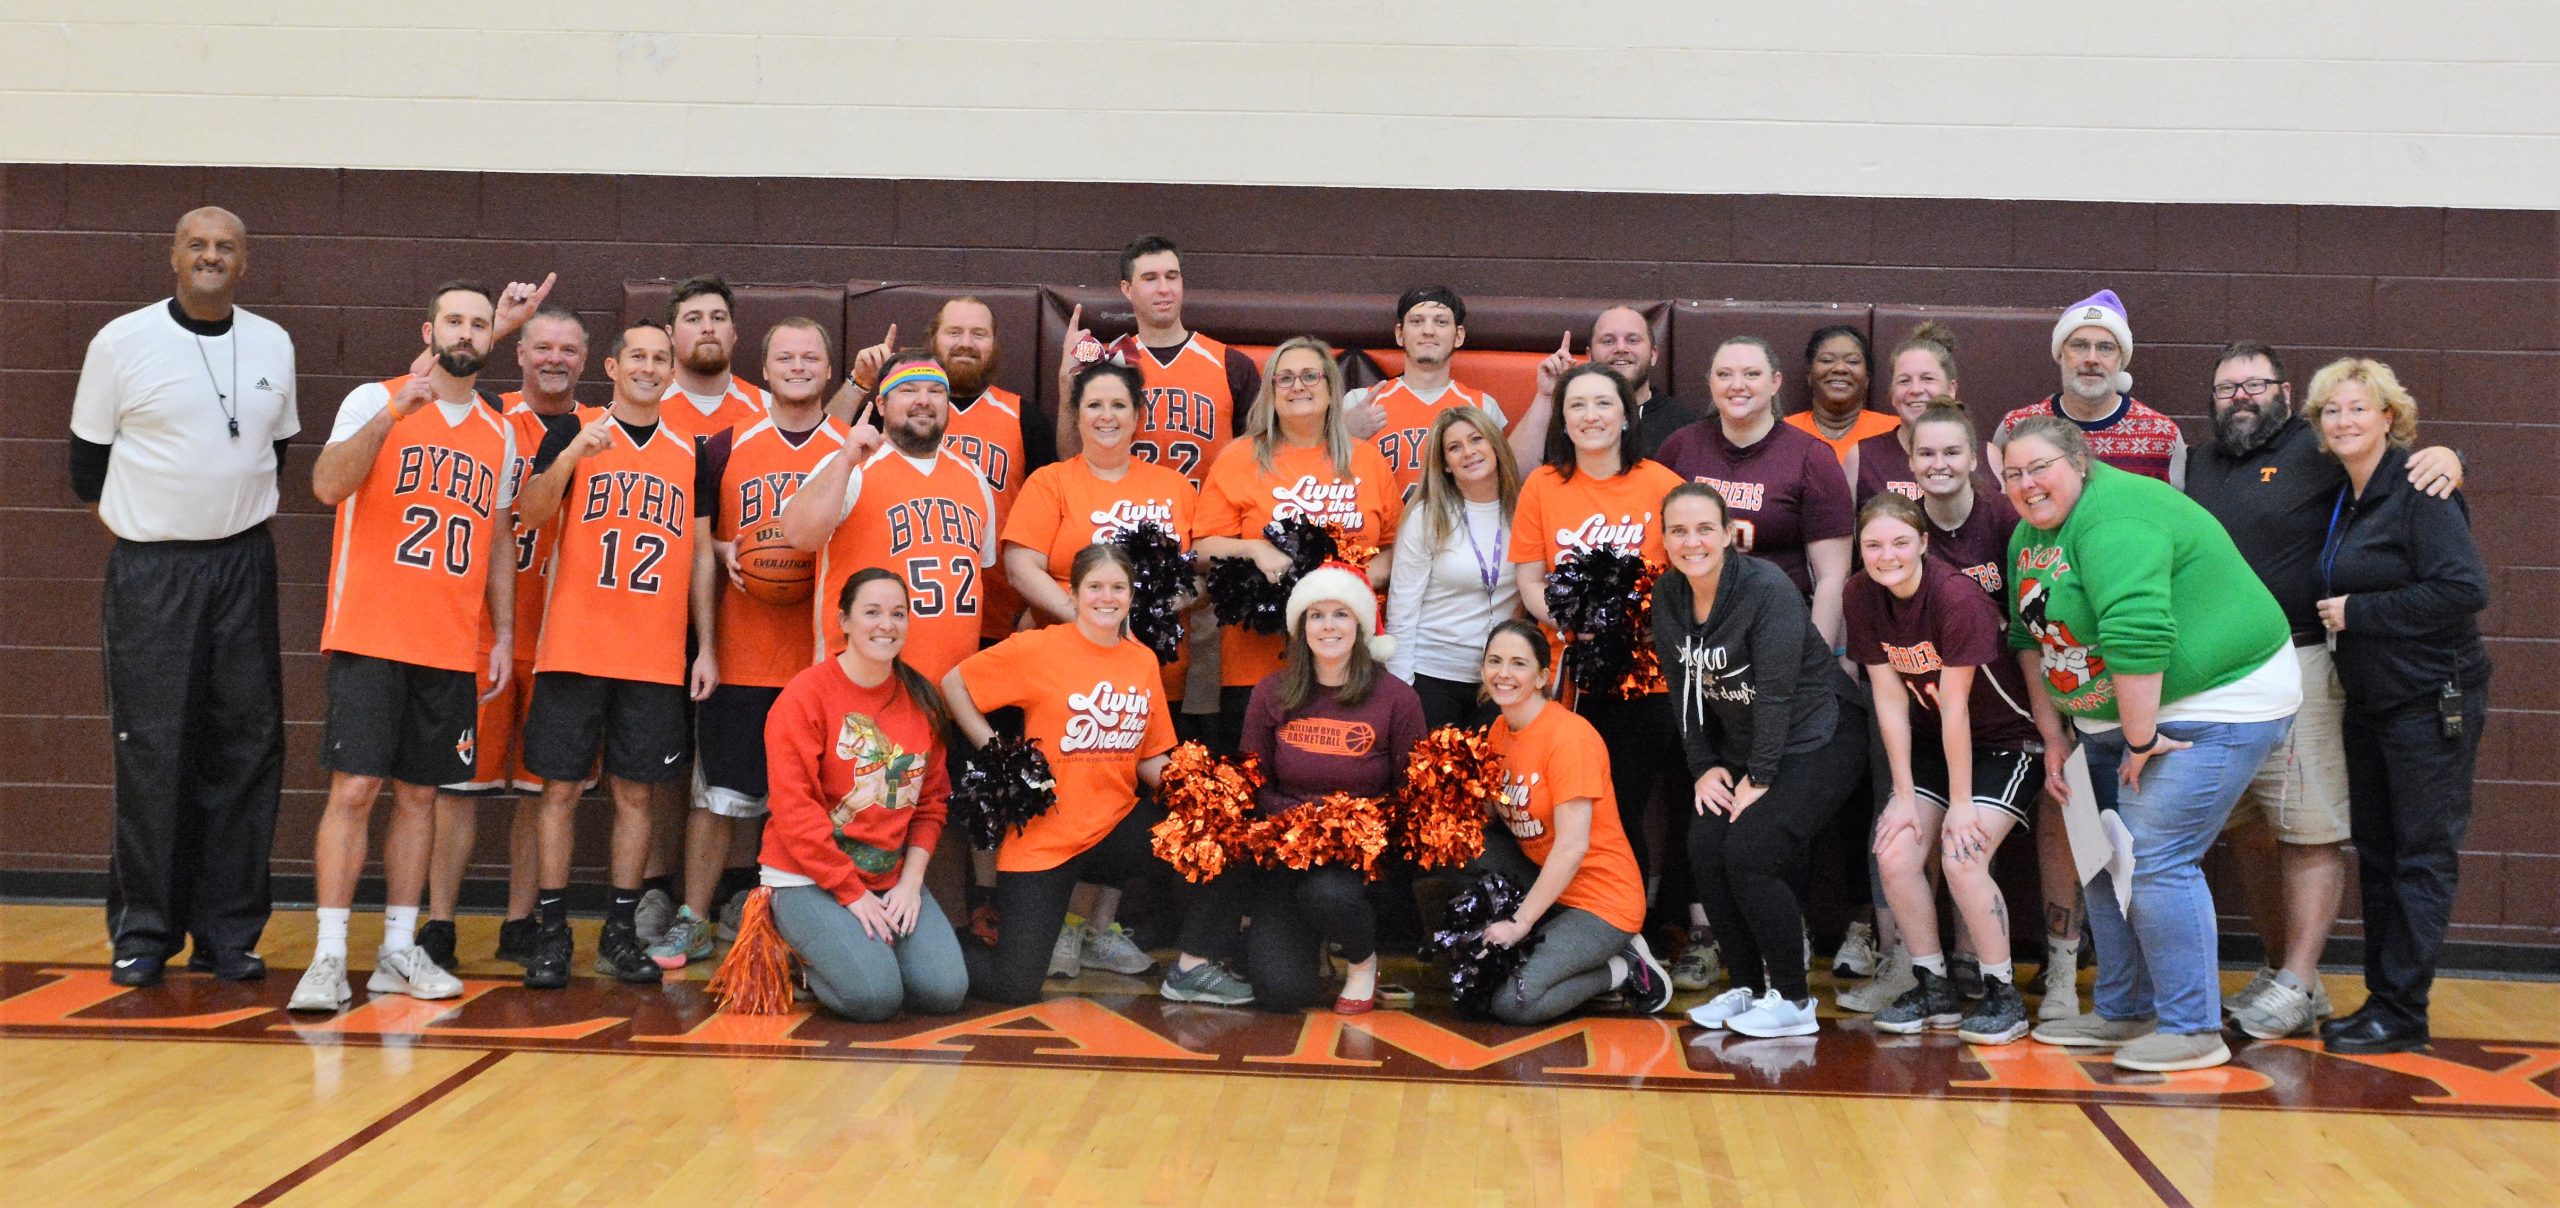 WBMS combines annual faculty/student ball game with food drive finale ...